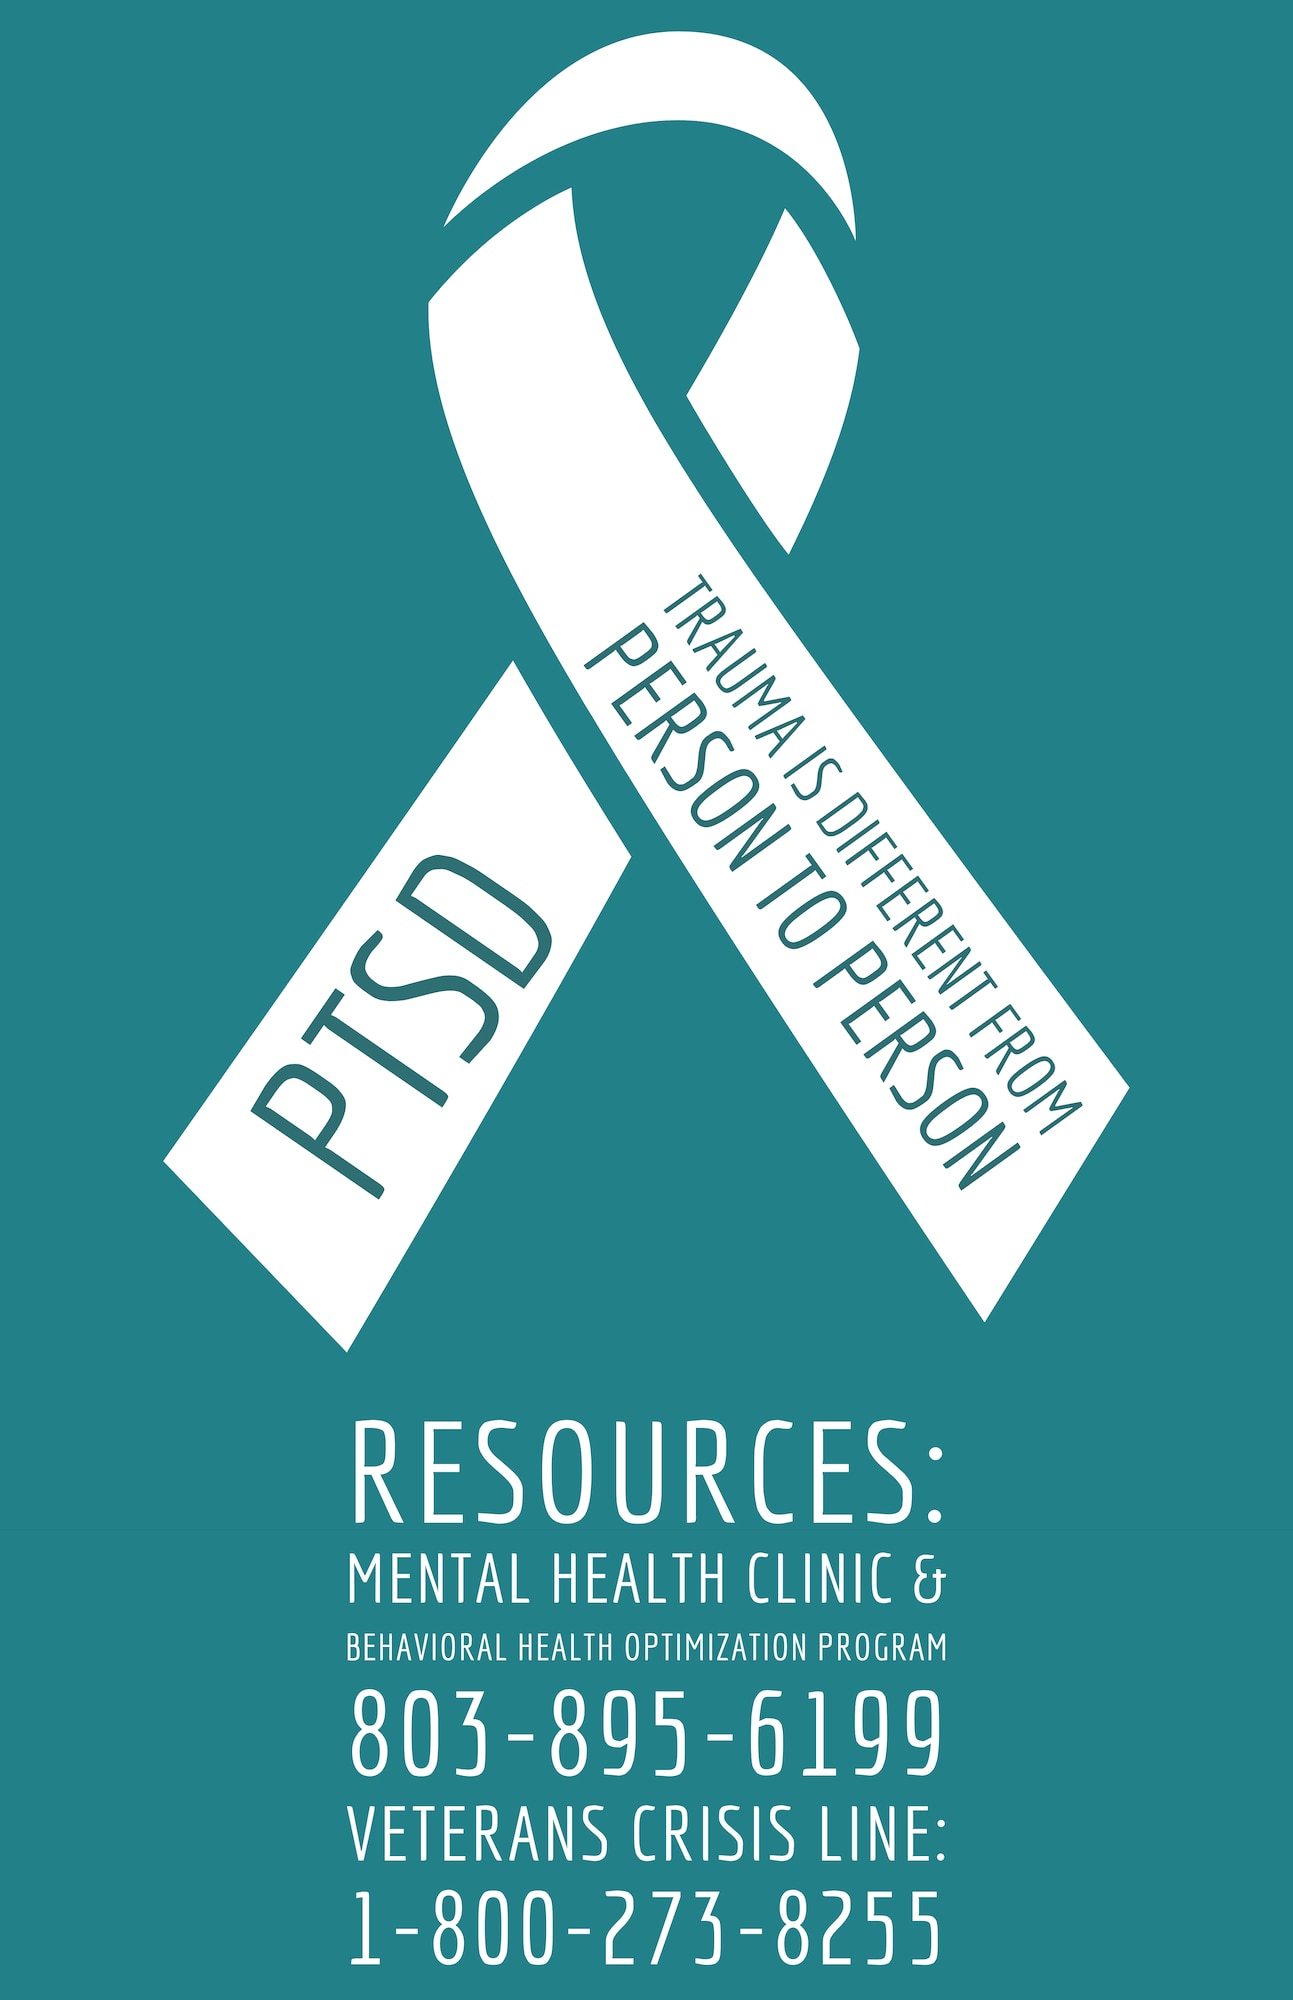 Post-traumatic stress disorder (PTSD) affects 7-8% of the U.S. population.